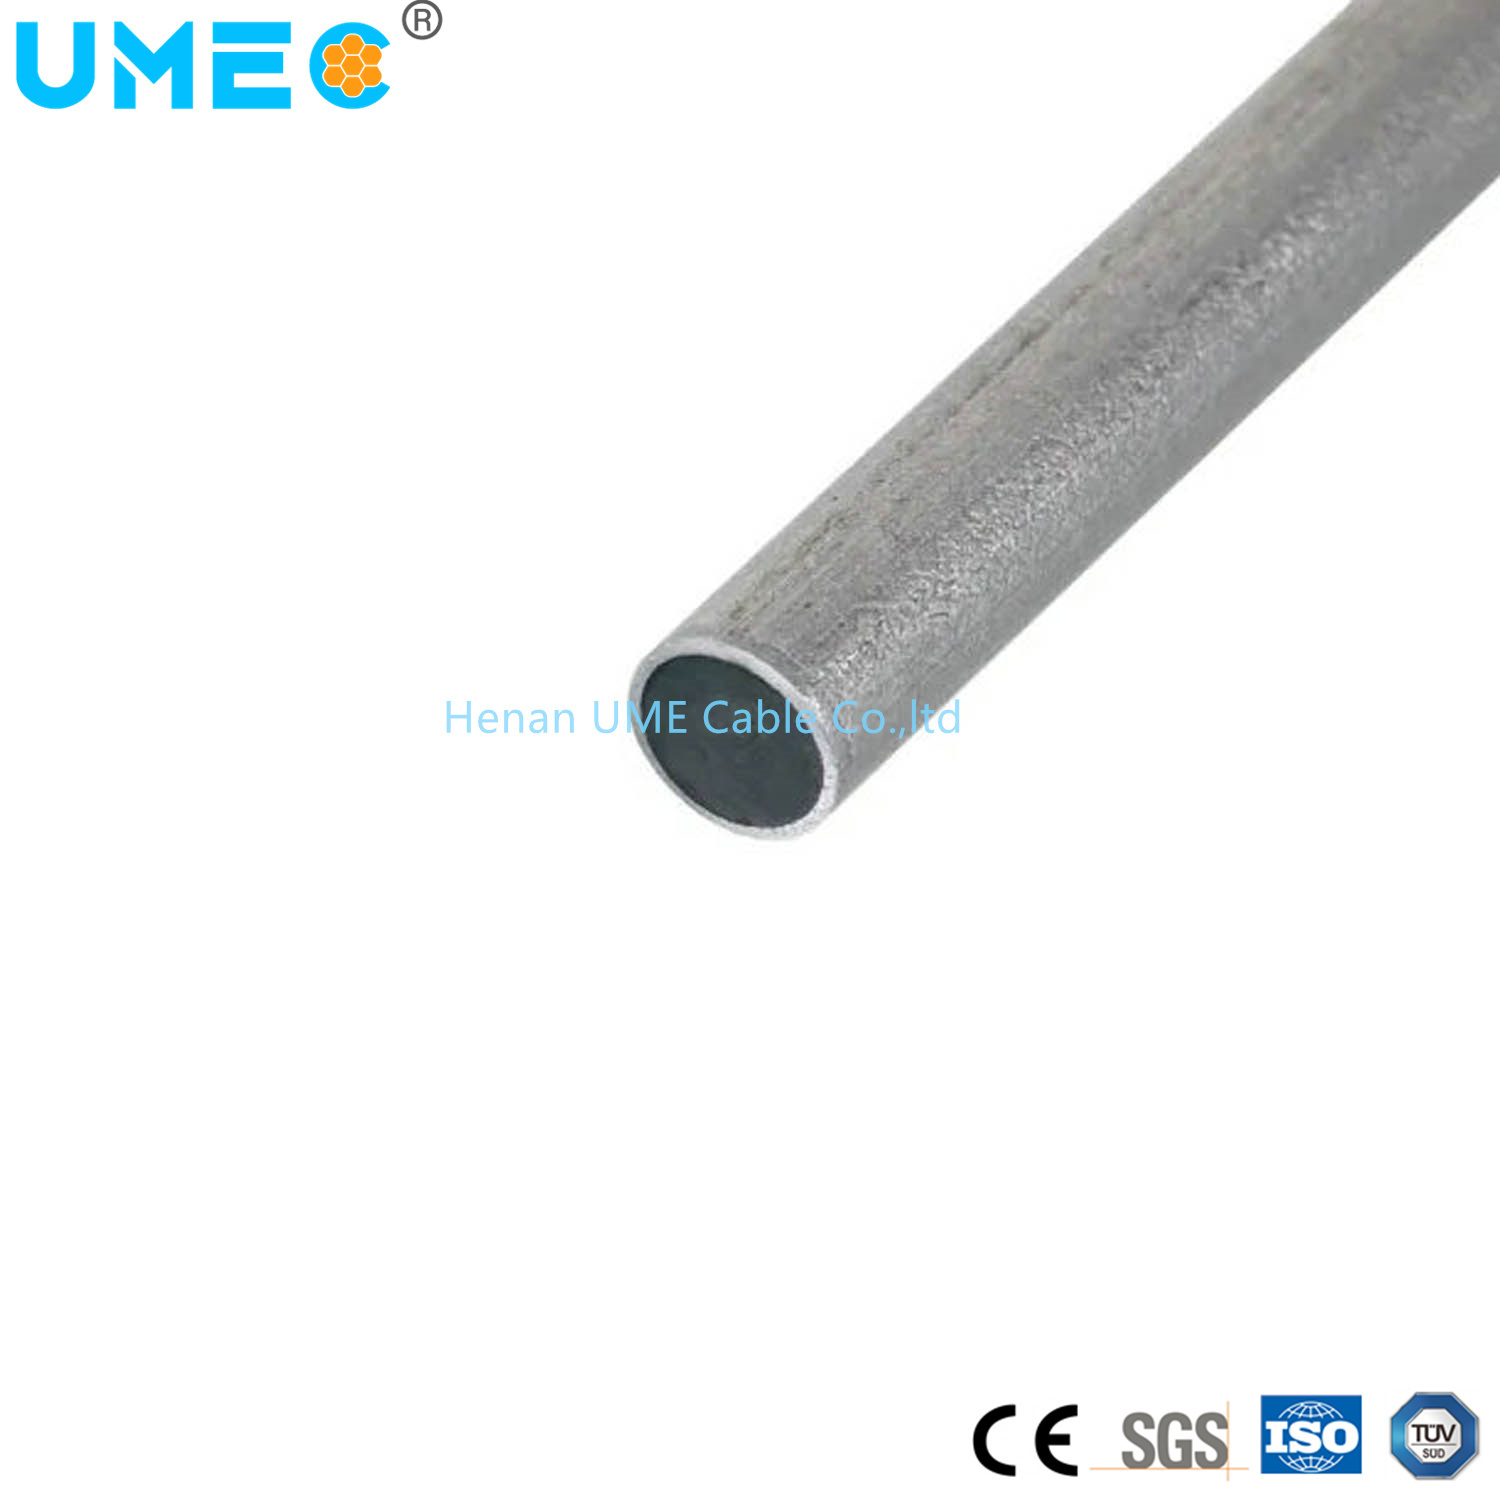 Alumoweld /Ground Wire/Acs/Aluminum Clad Steel Stranded for ASTM Standard 7wires and 19 Wires Stranded